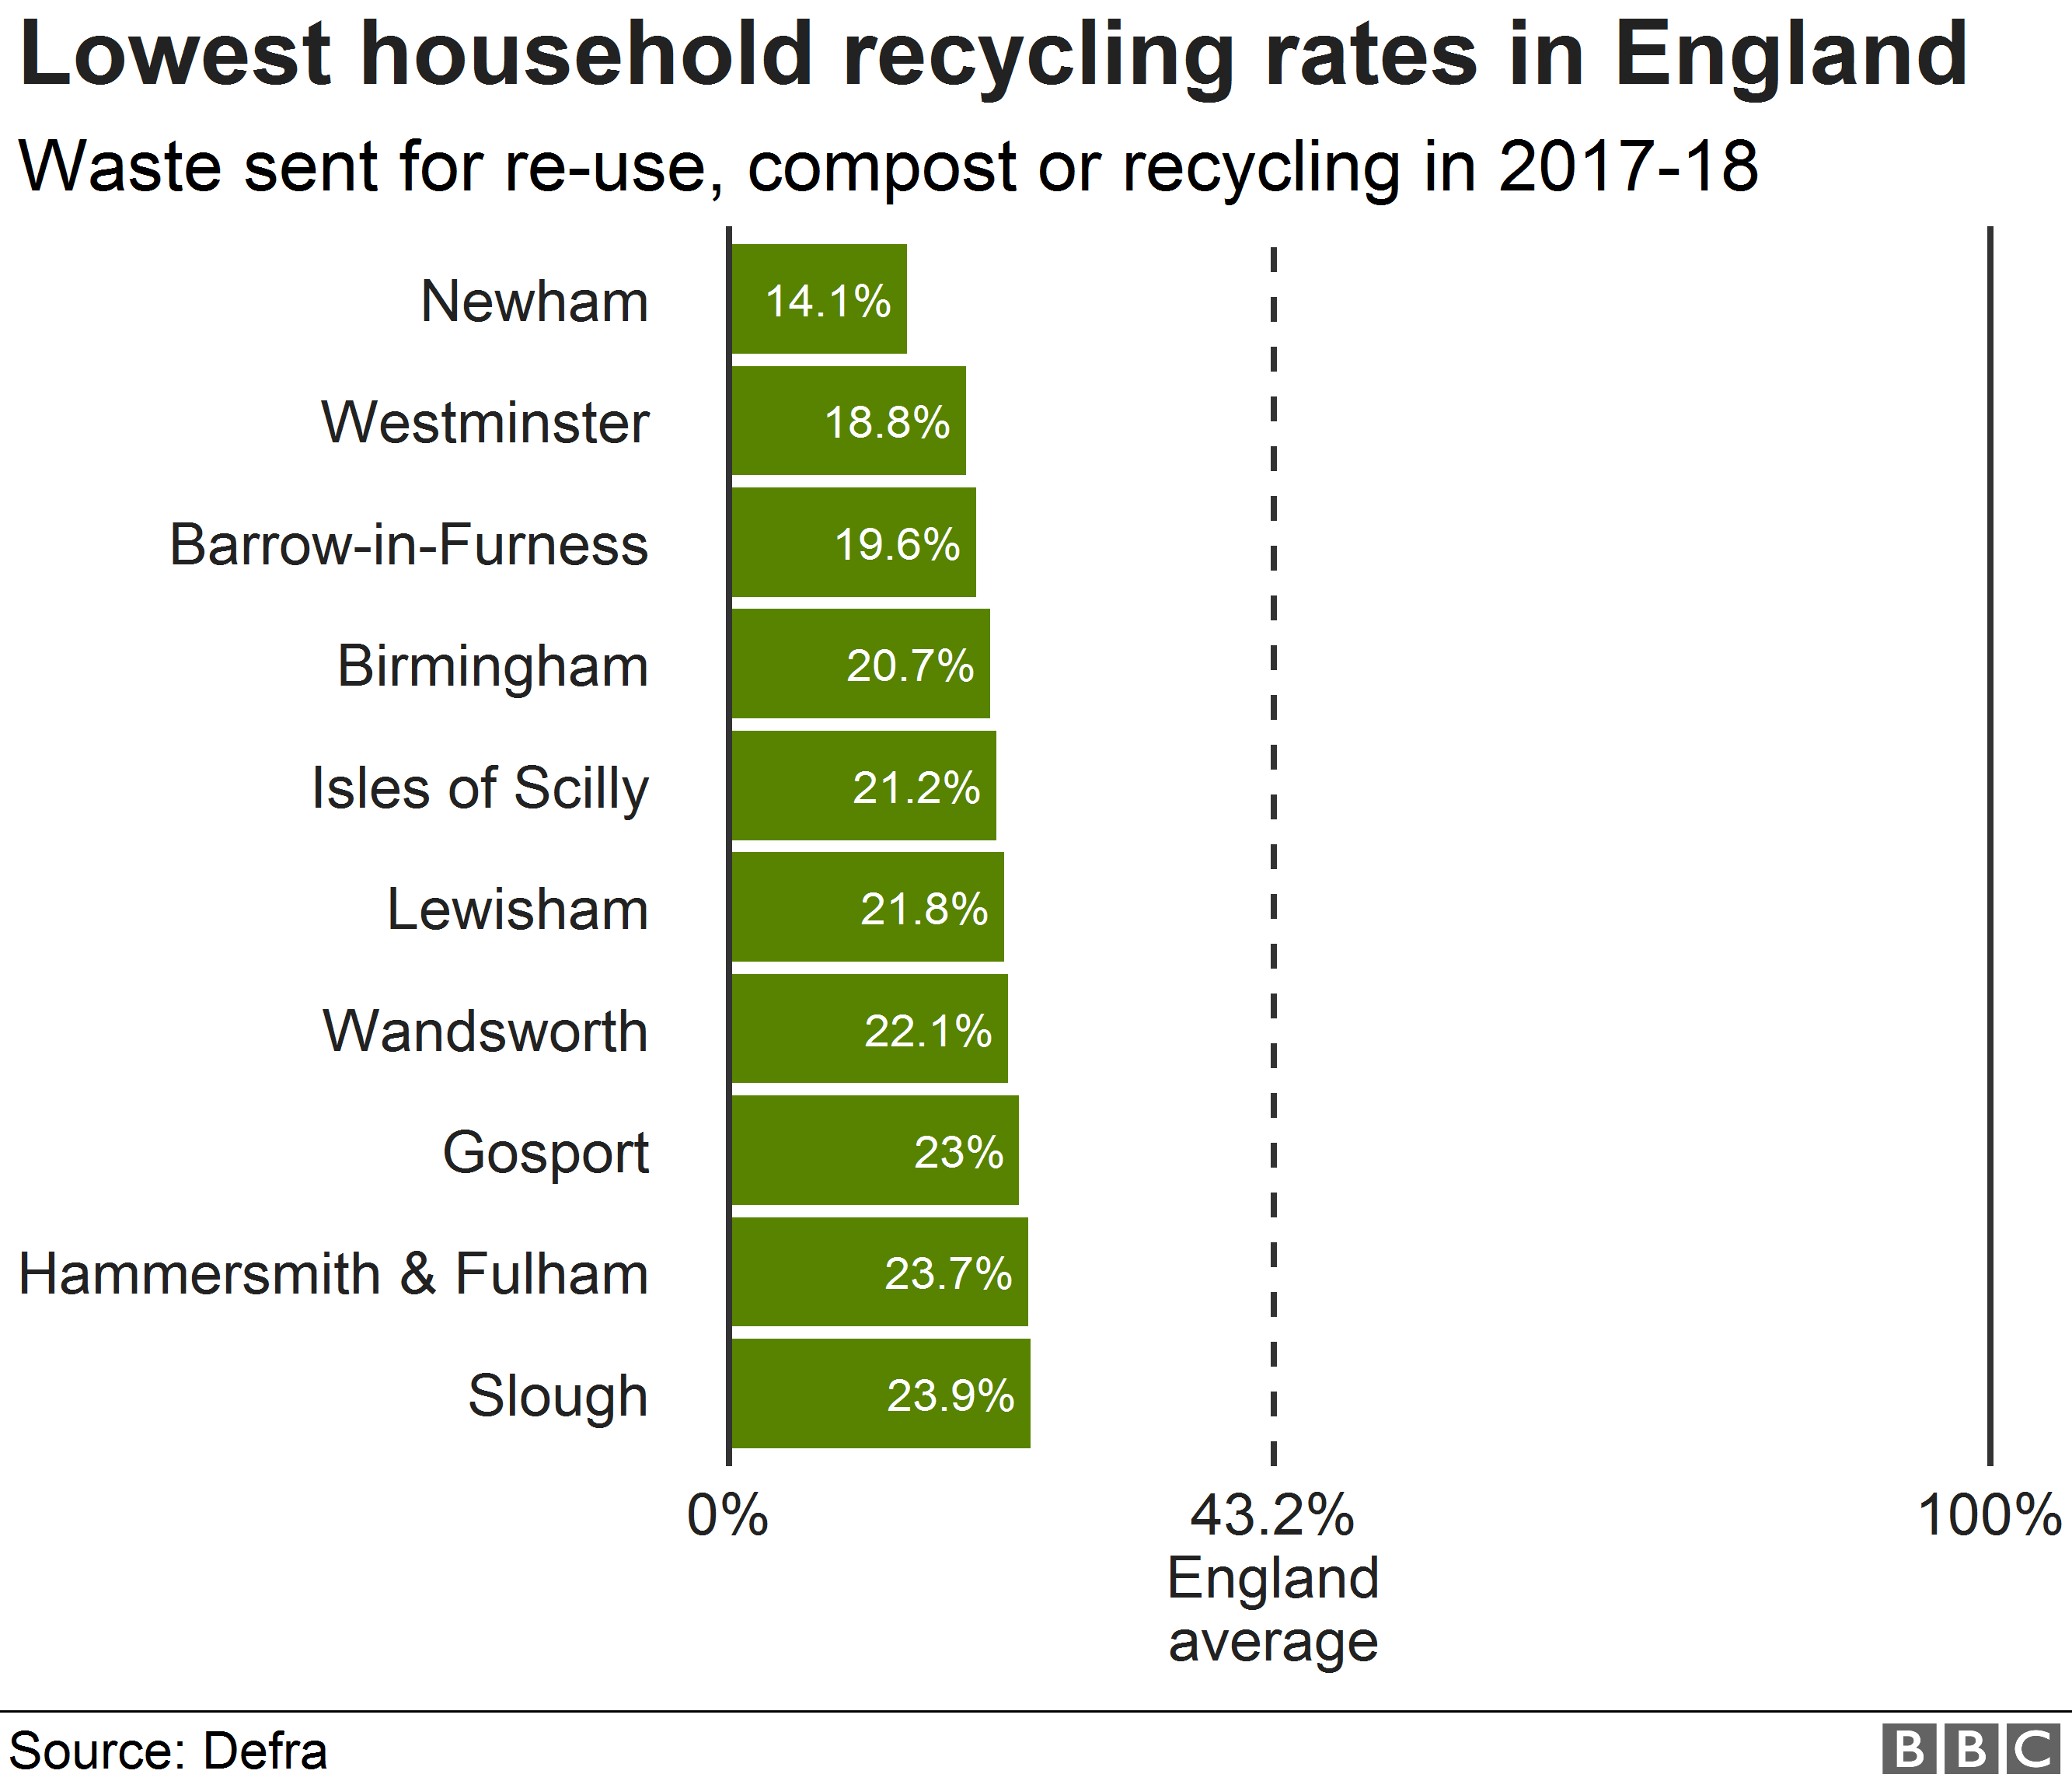 Lowest household recycling rates in England